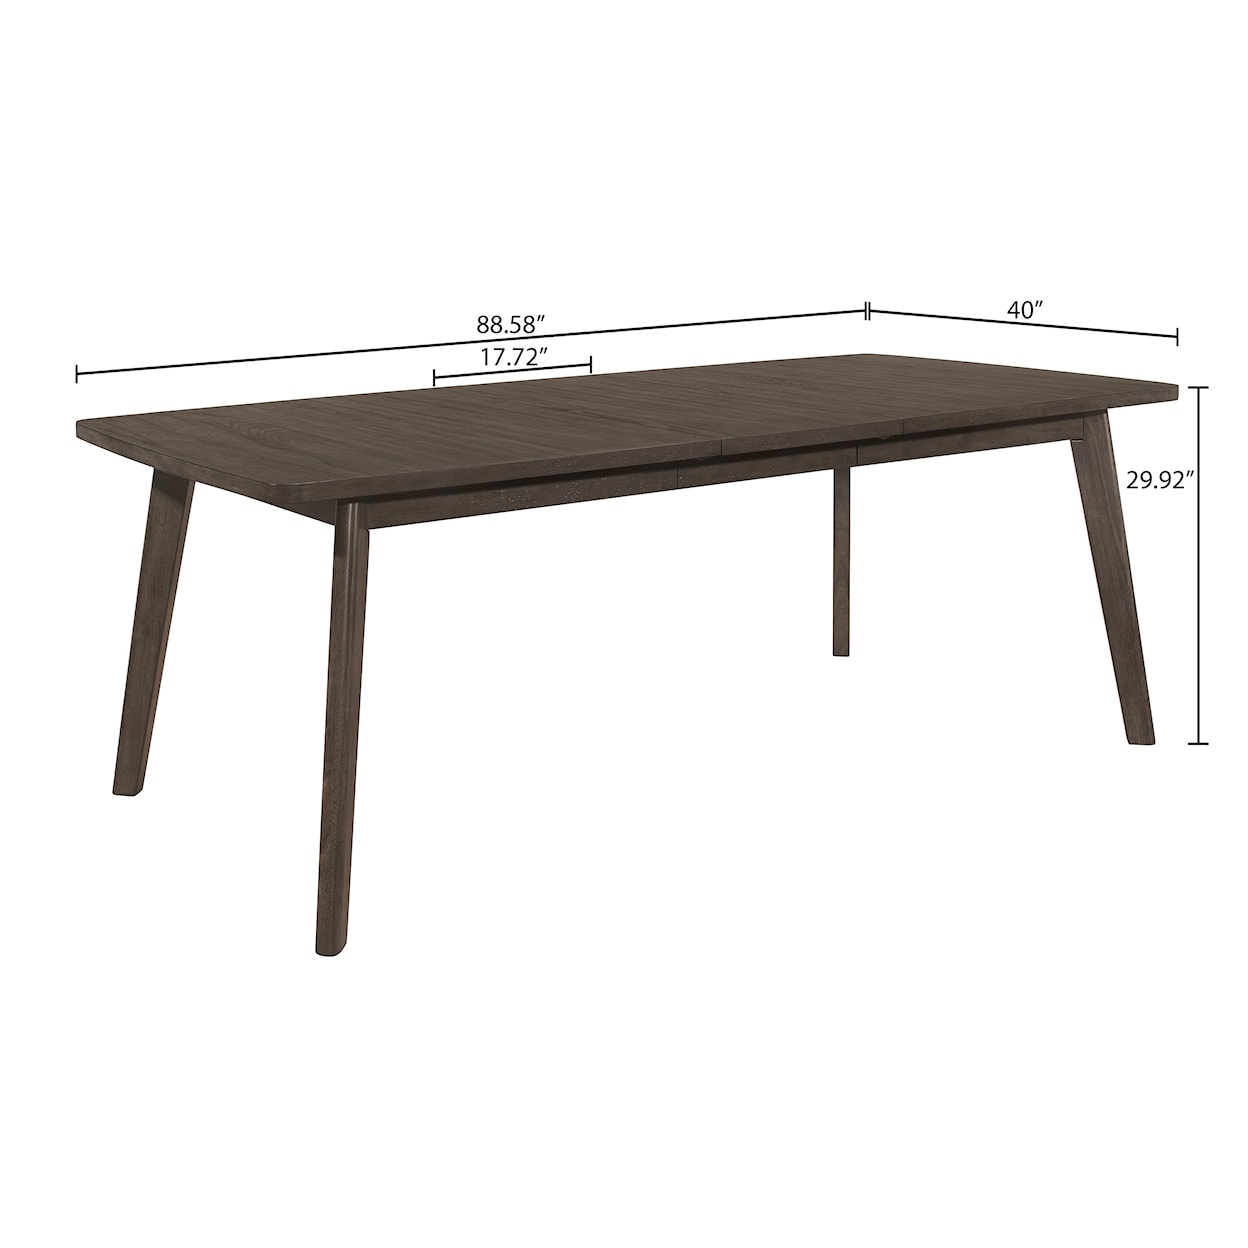 CM Ember Dining Table with Leaf